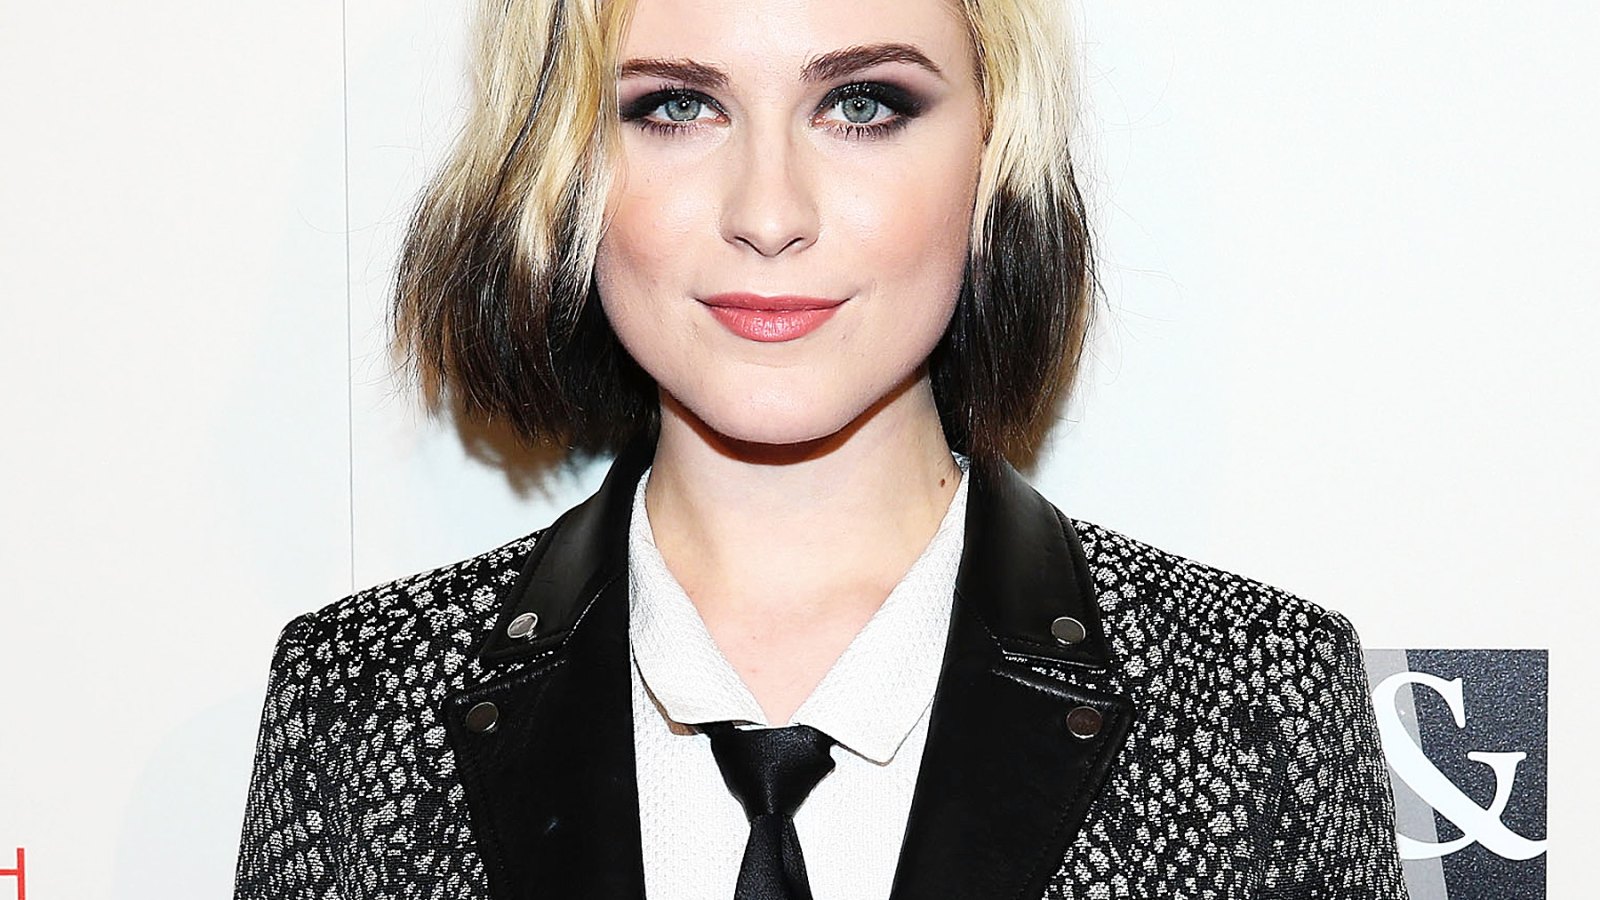 Evan Rachel Wood attends an event on May 10, 2014